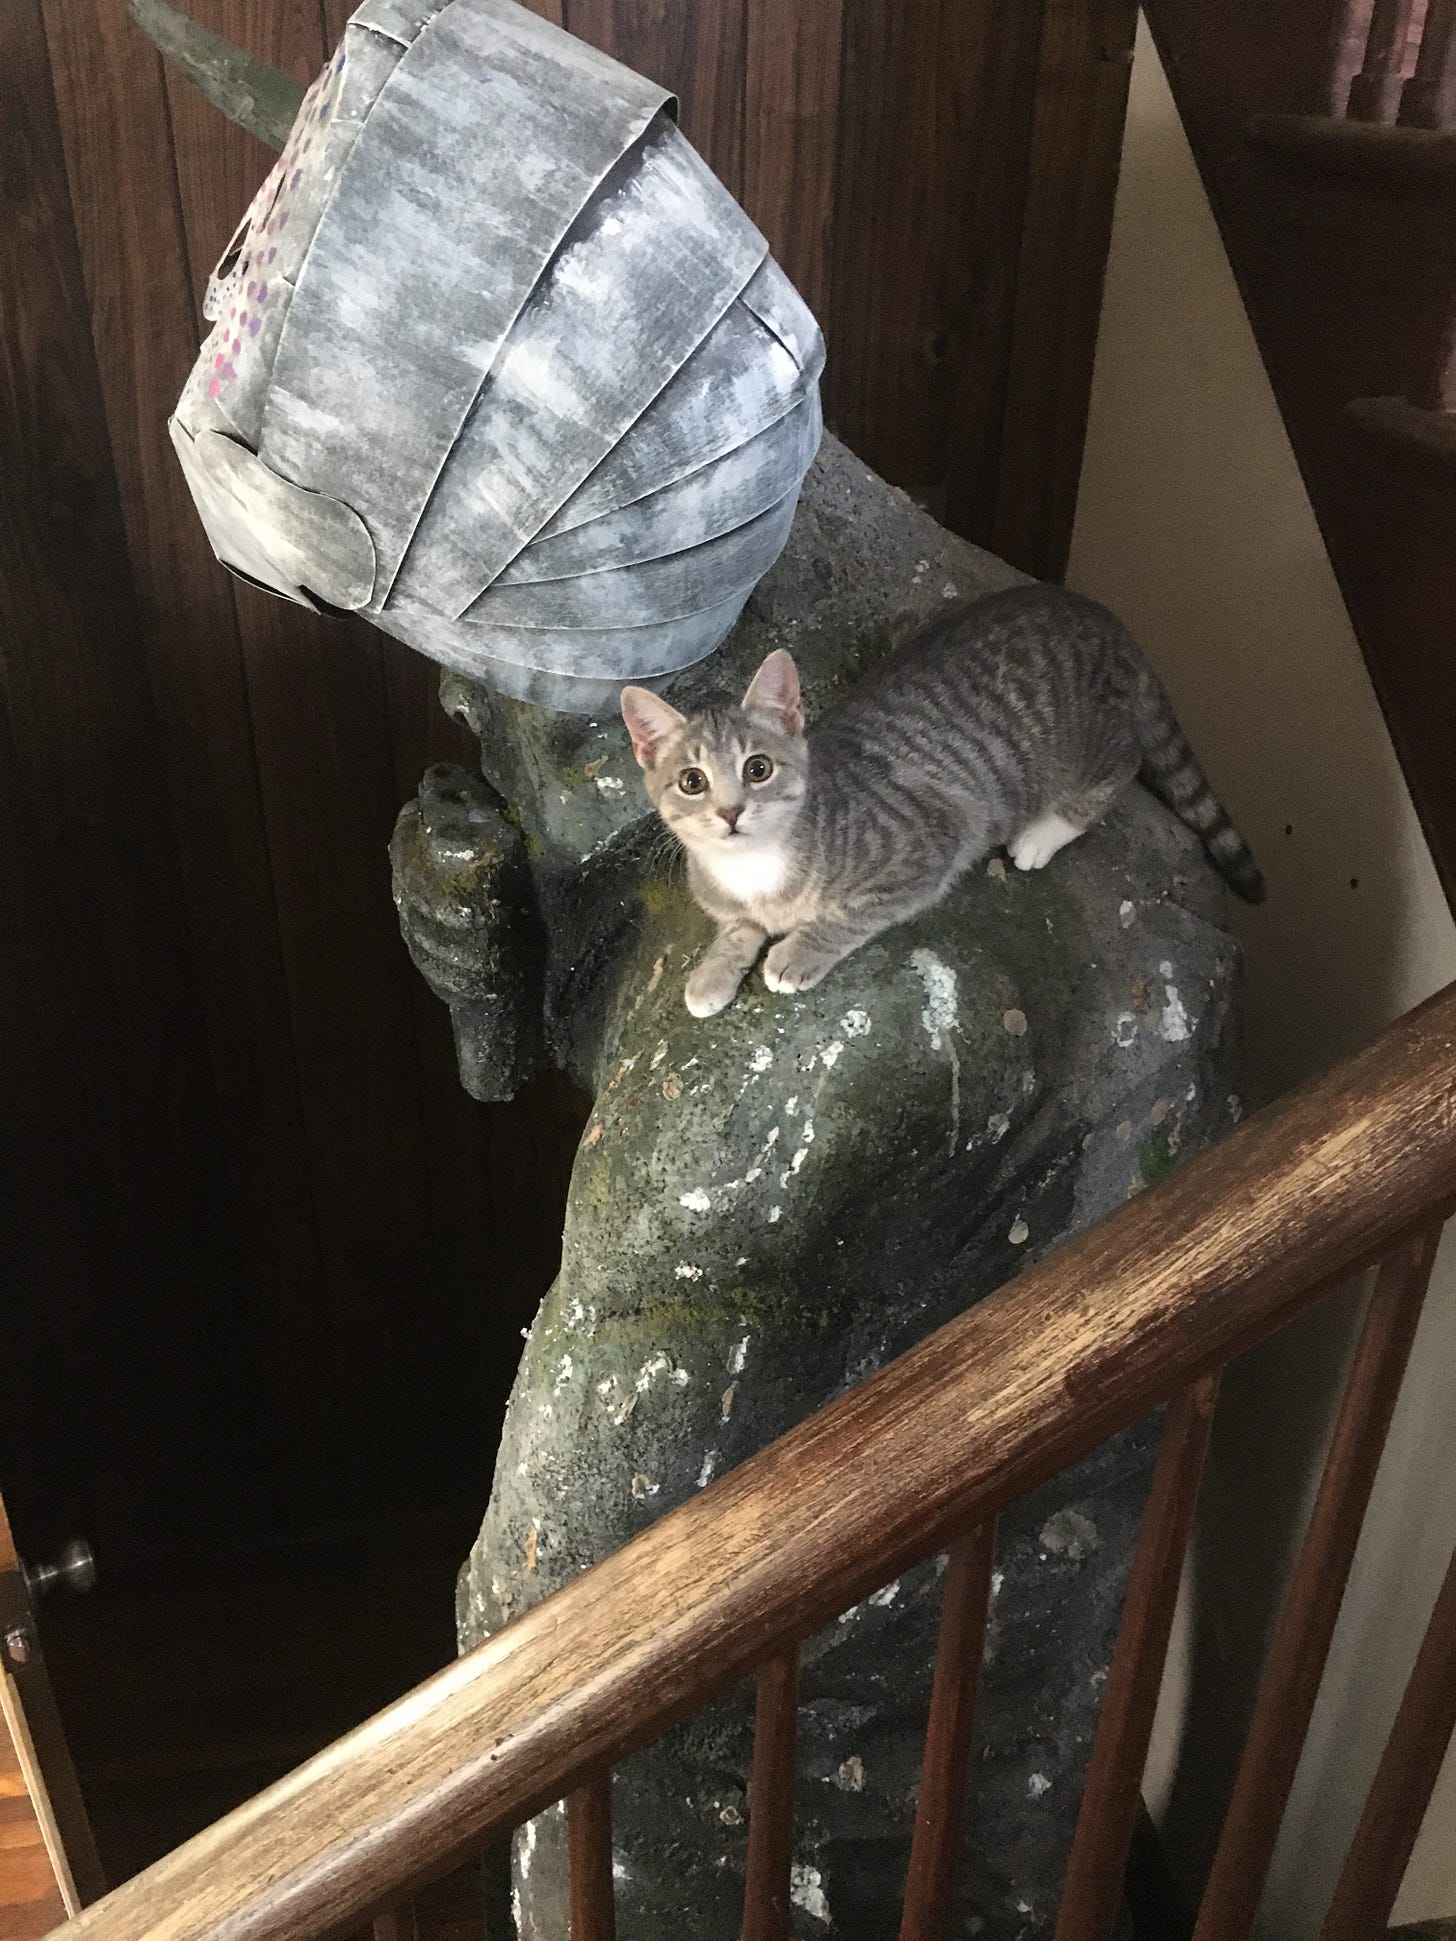 A kitten perched atop a damaged statue.